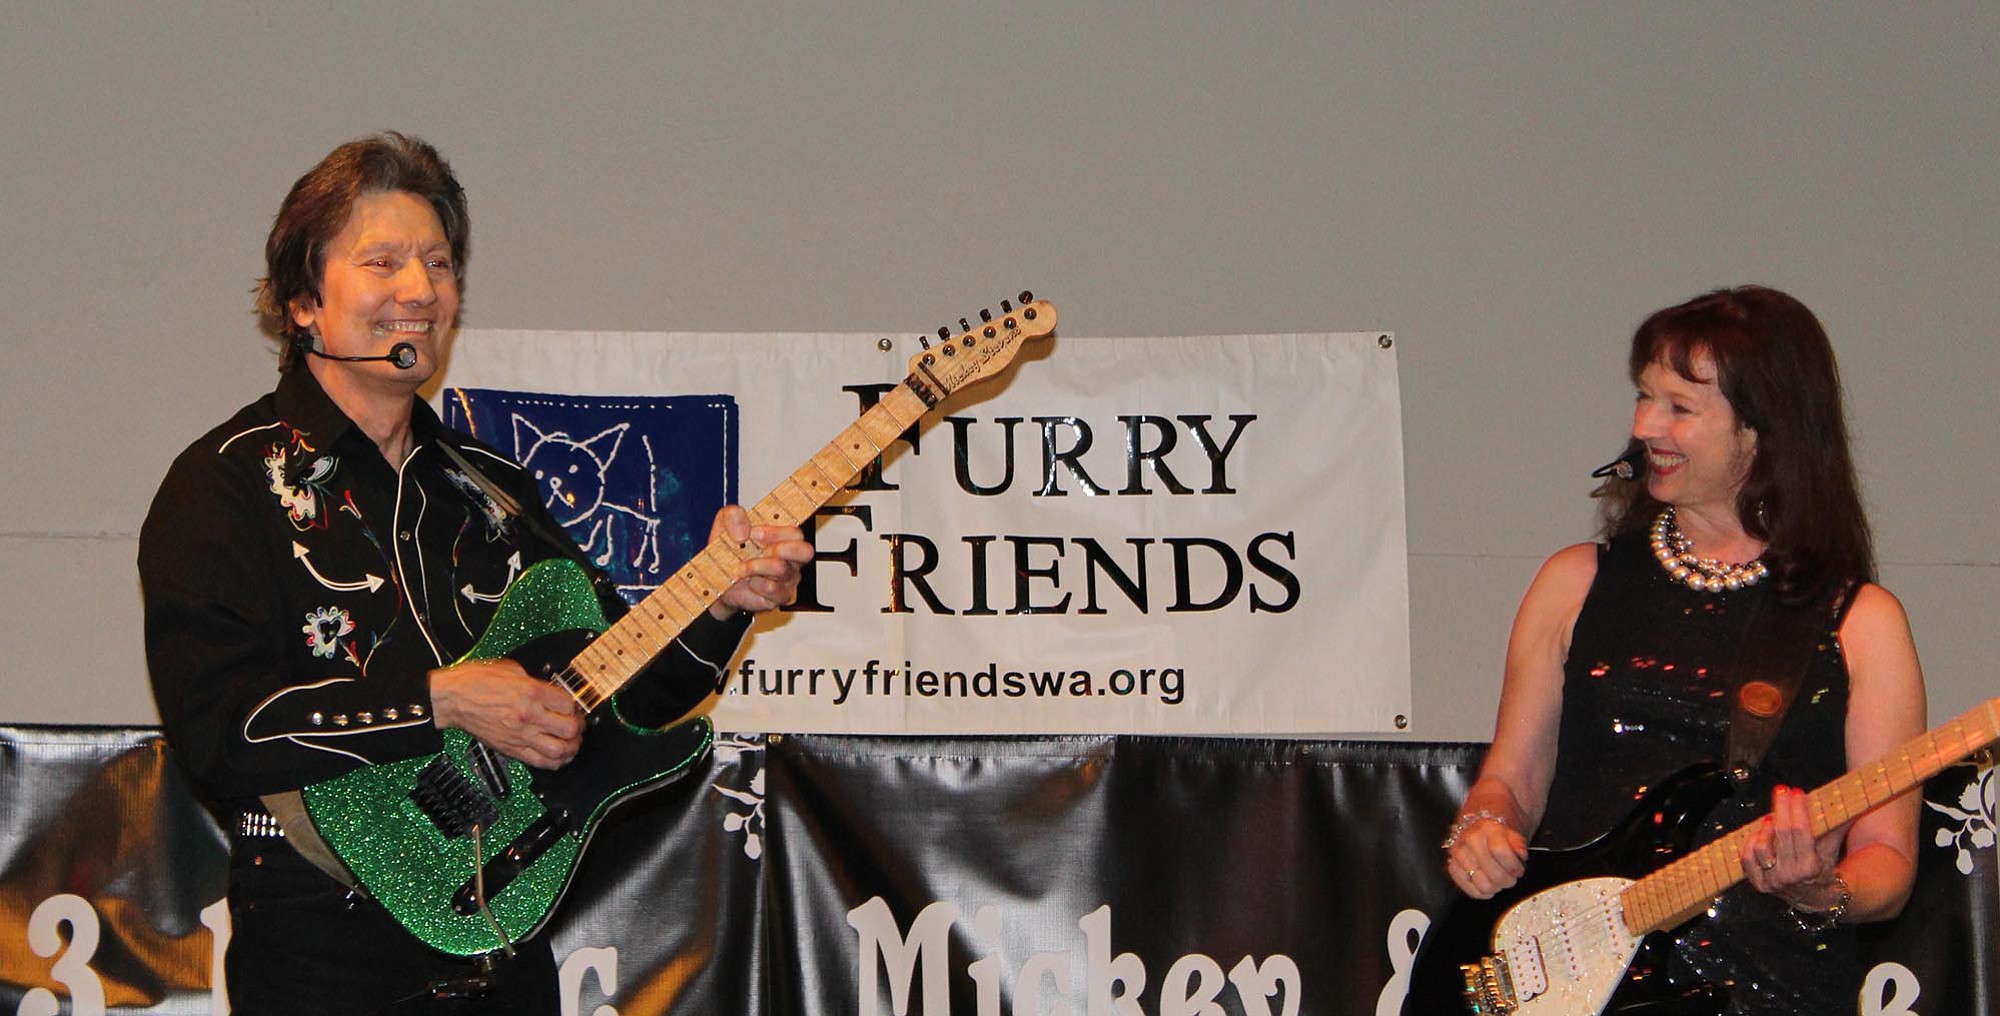 Esther Short: Mickey and Diane perform at a fundraiser for Furry Friends, where the nonprofit raised $1,241 for  a new halfway home for kittens.